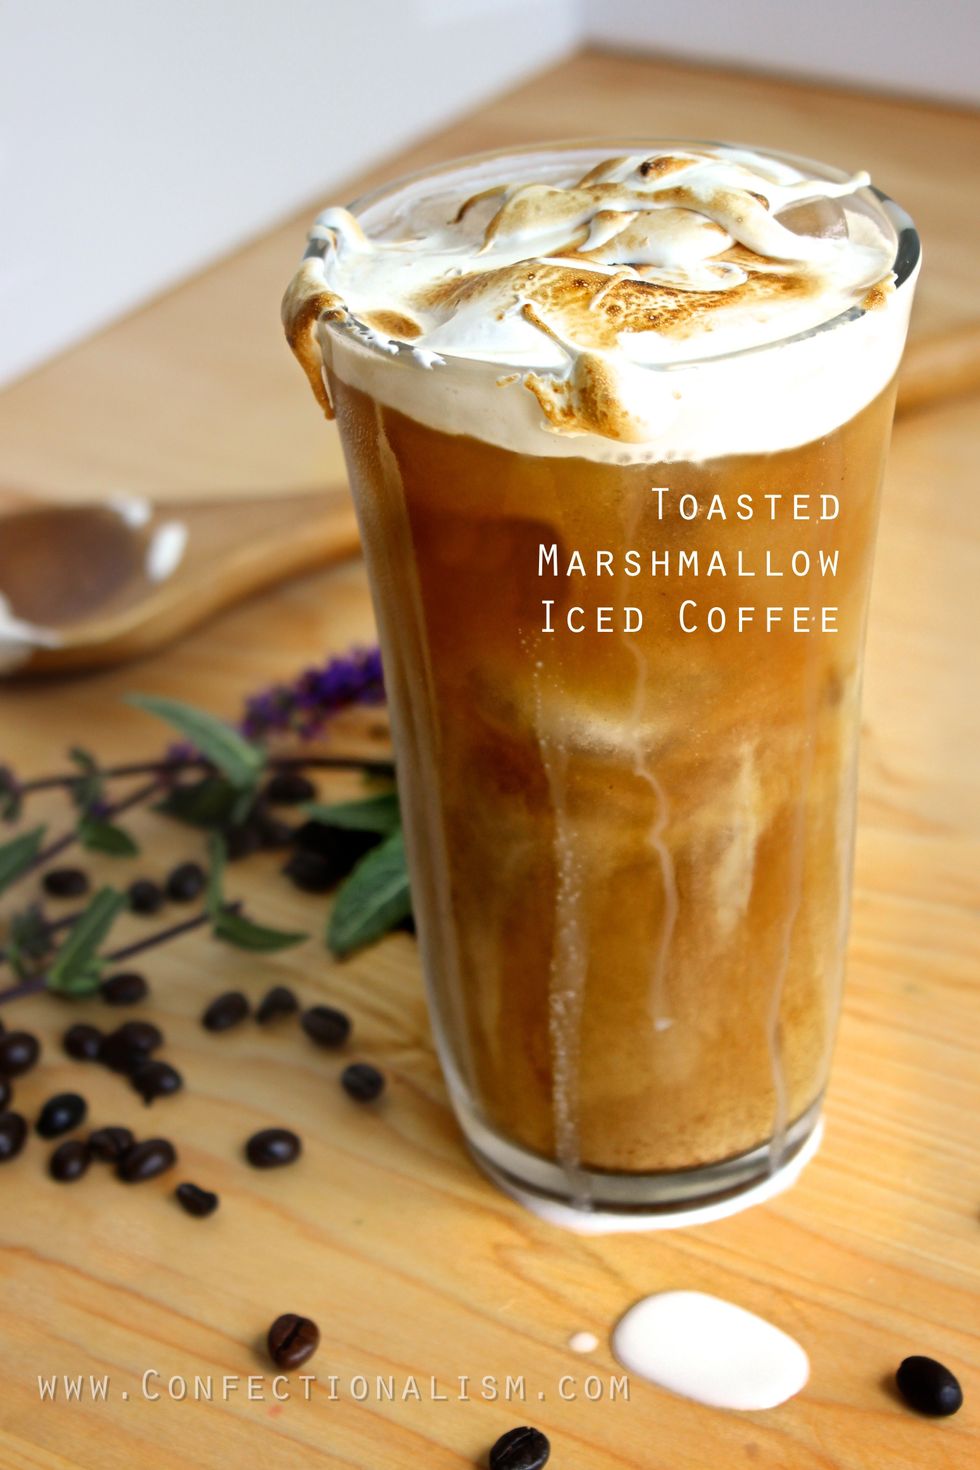 Now you have your coffee and your ready for whatever the world throws at you. Find more delicious recipes like this one at www.confectionalism.com